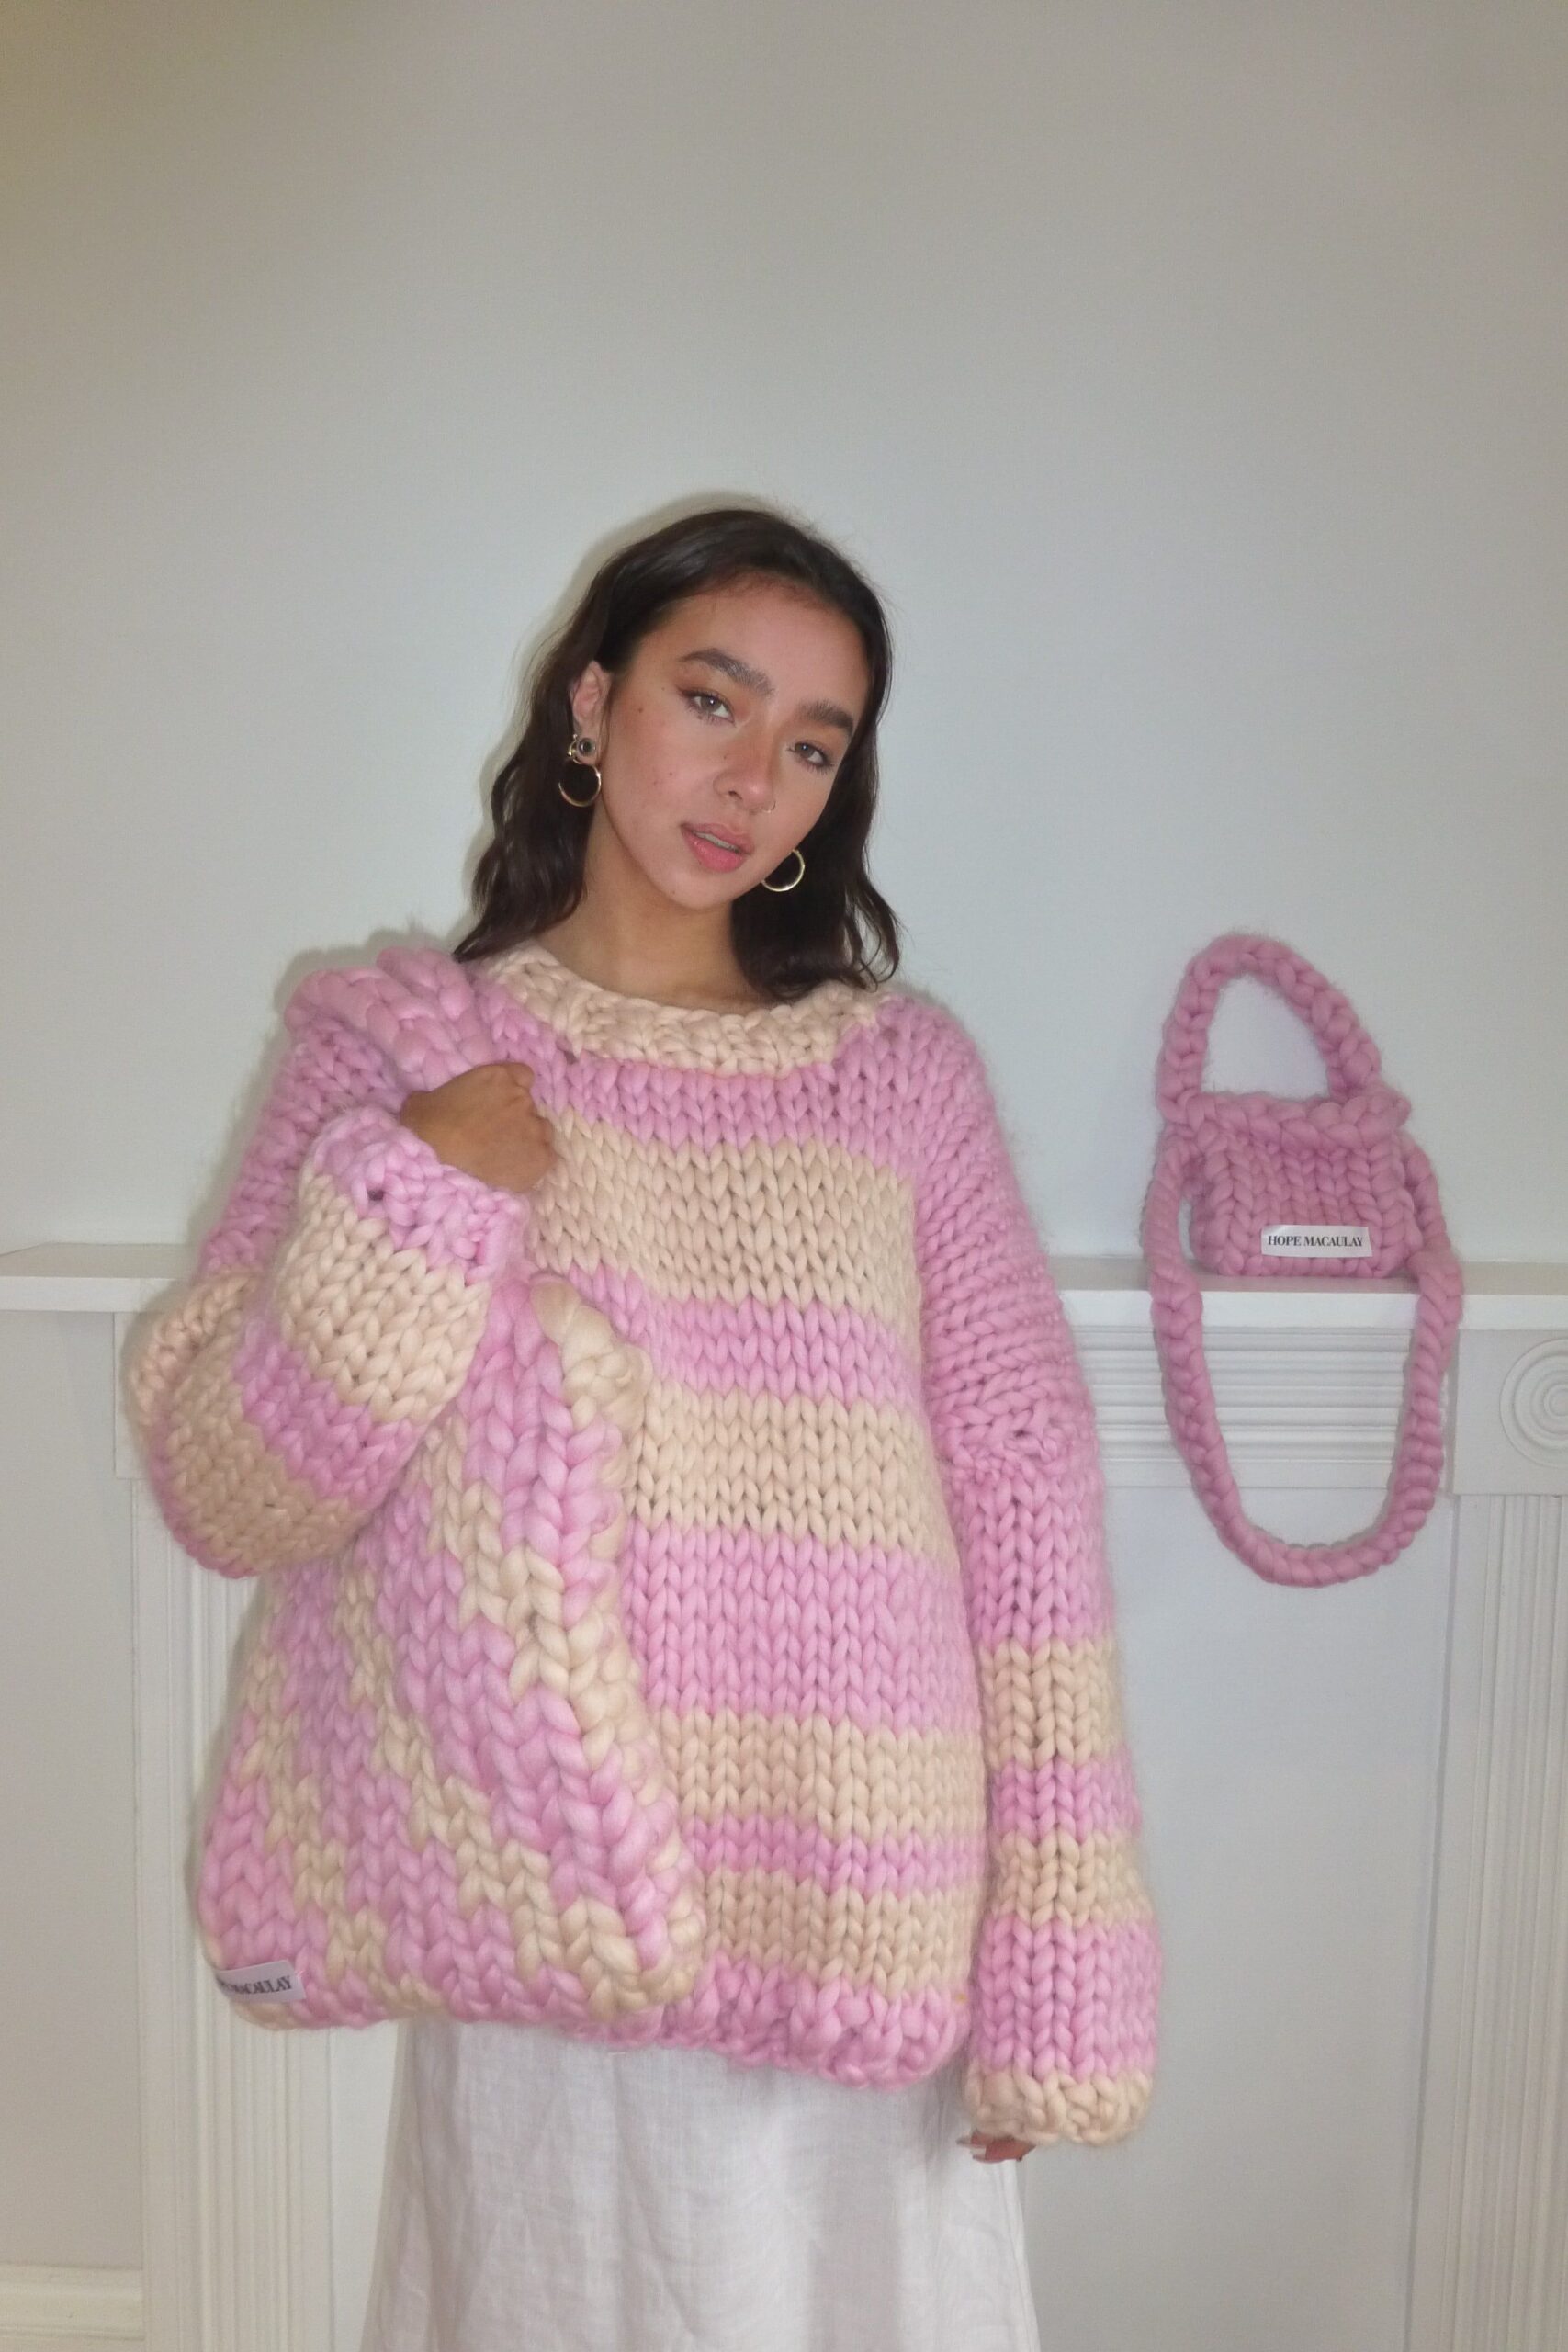 Crafted with Love: Handmade Knit Sweaters
to Keep You Warm